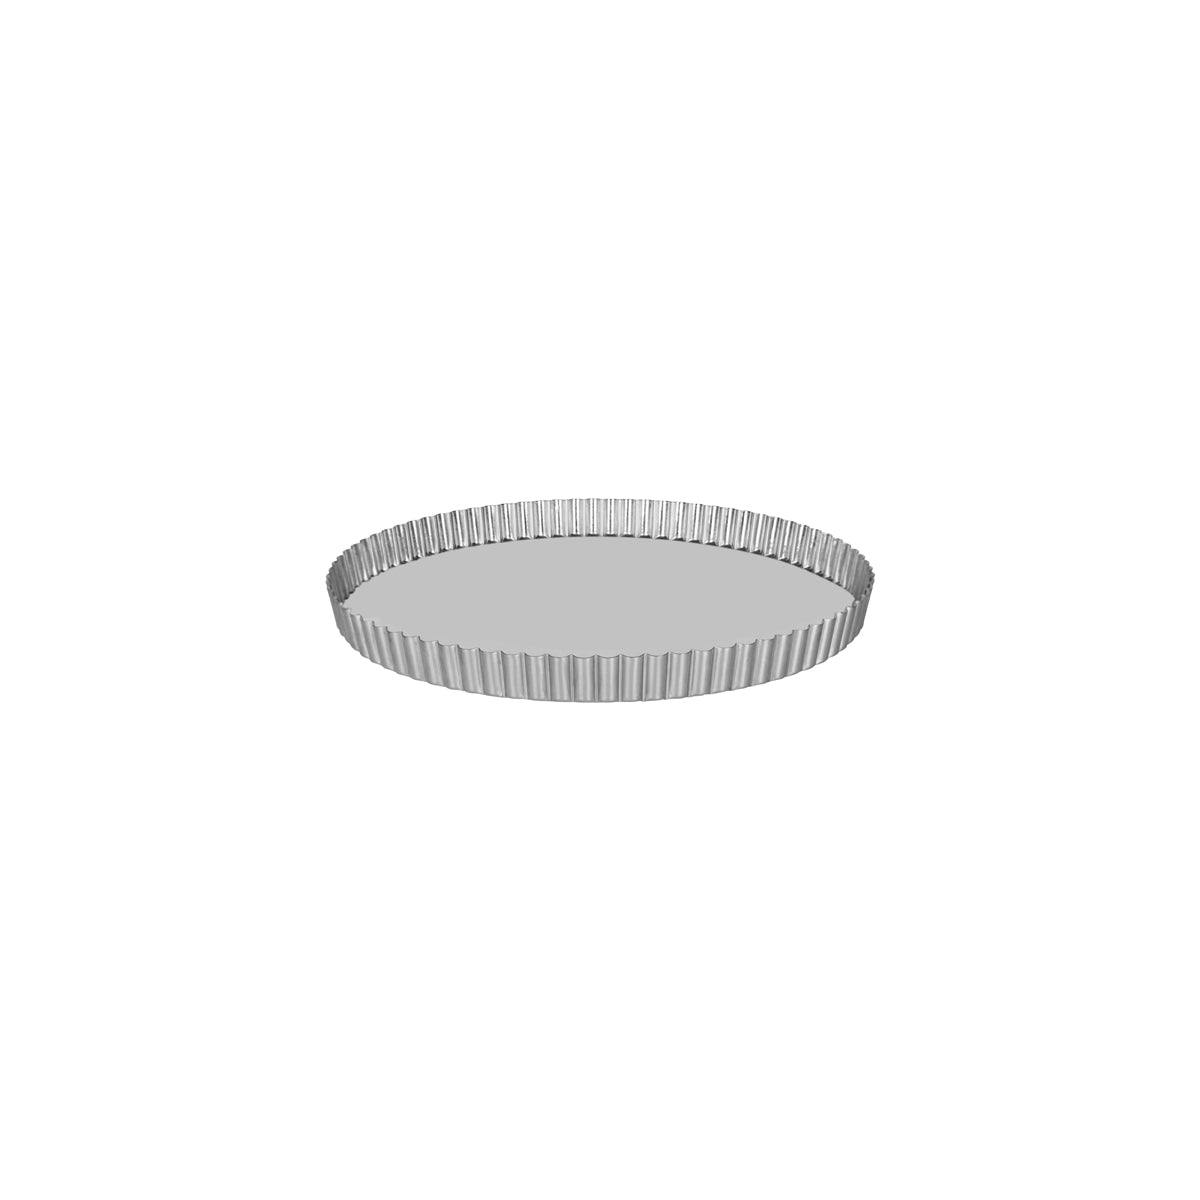 64128 Guery Quiche Pan Round Fluted Loose Base 280x25mm Tomkin Australia Hospitality Supplies